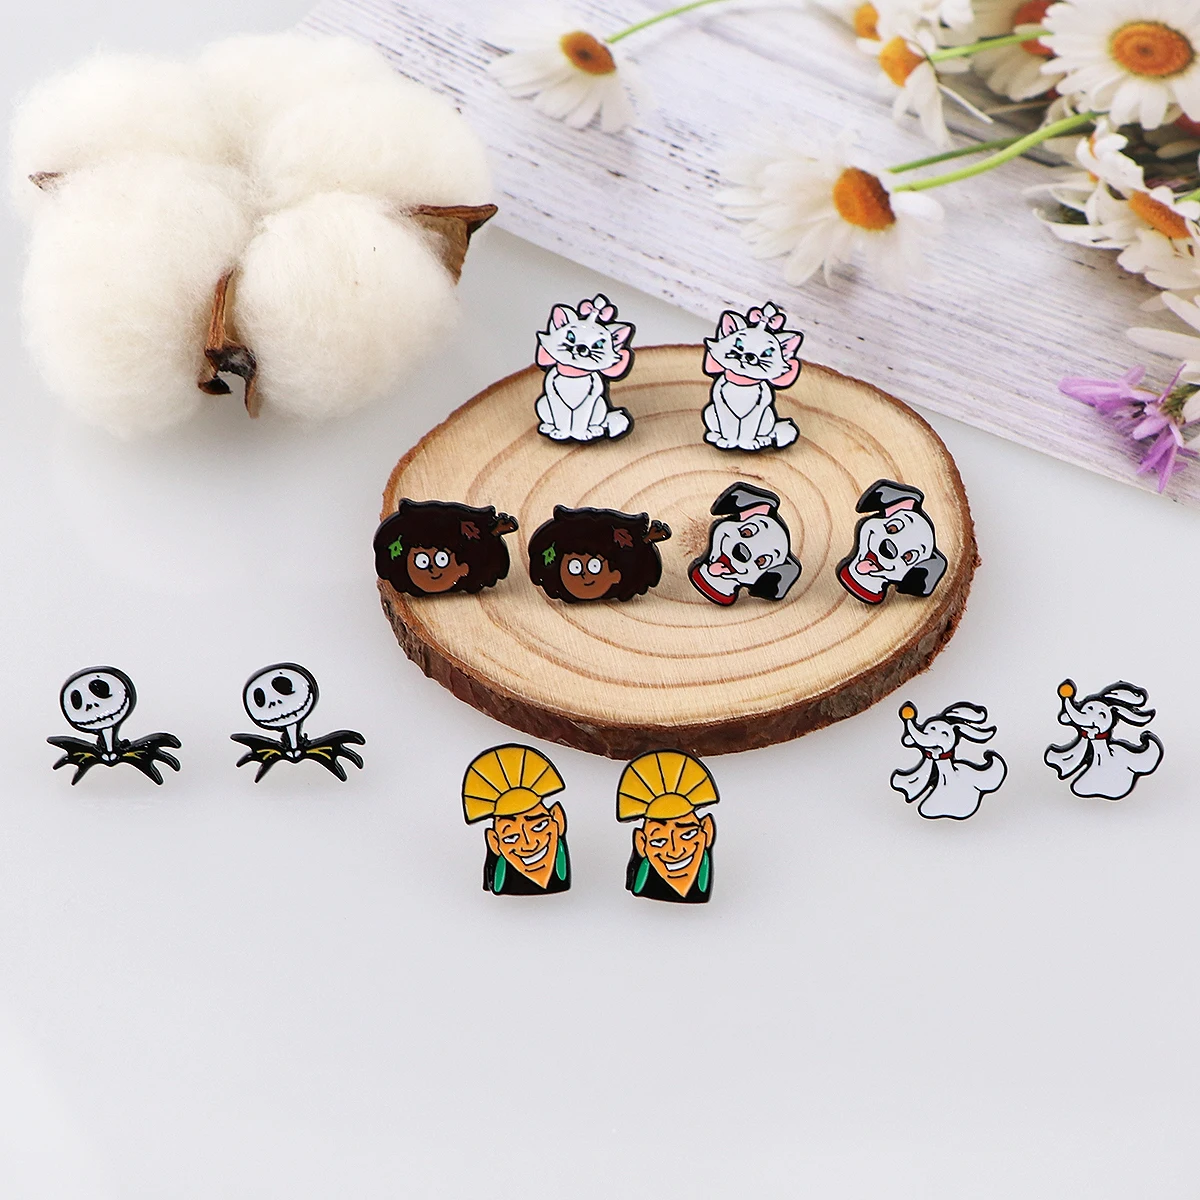 Cartoon Cute Enamel Earings for Women Girls Stud Earring Novel Fashion Jewelry Accessories Stainless steel Gift for Fans kid 12 pairs set cute multicolor stripe stud earrings set for women girls jewelry fashion round acrylic small earring brincos gift